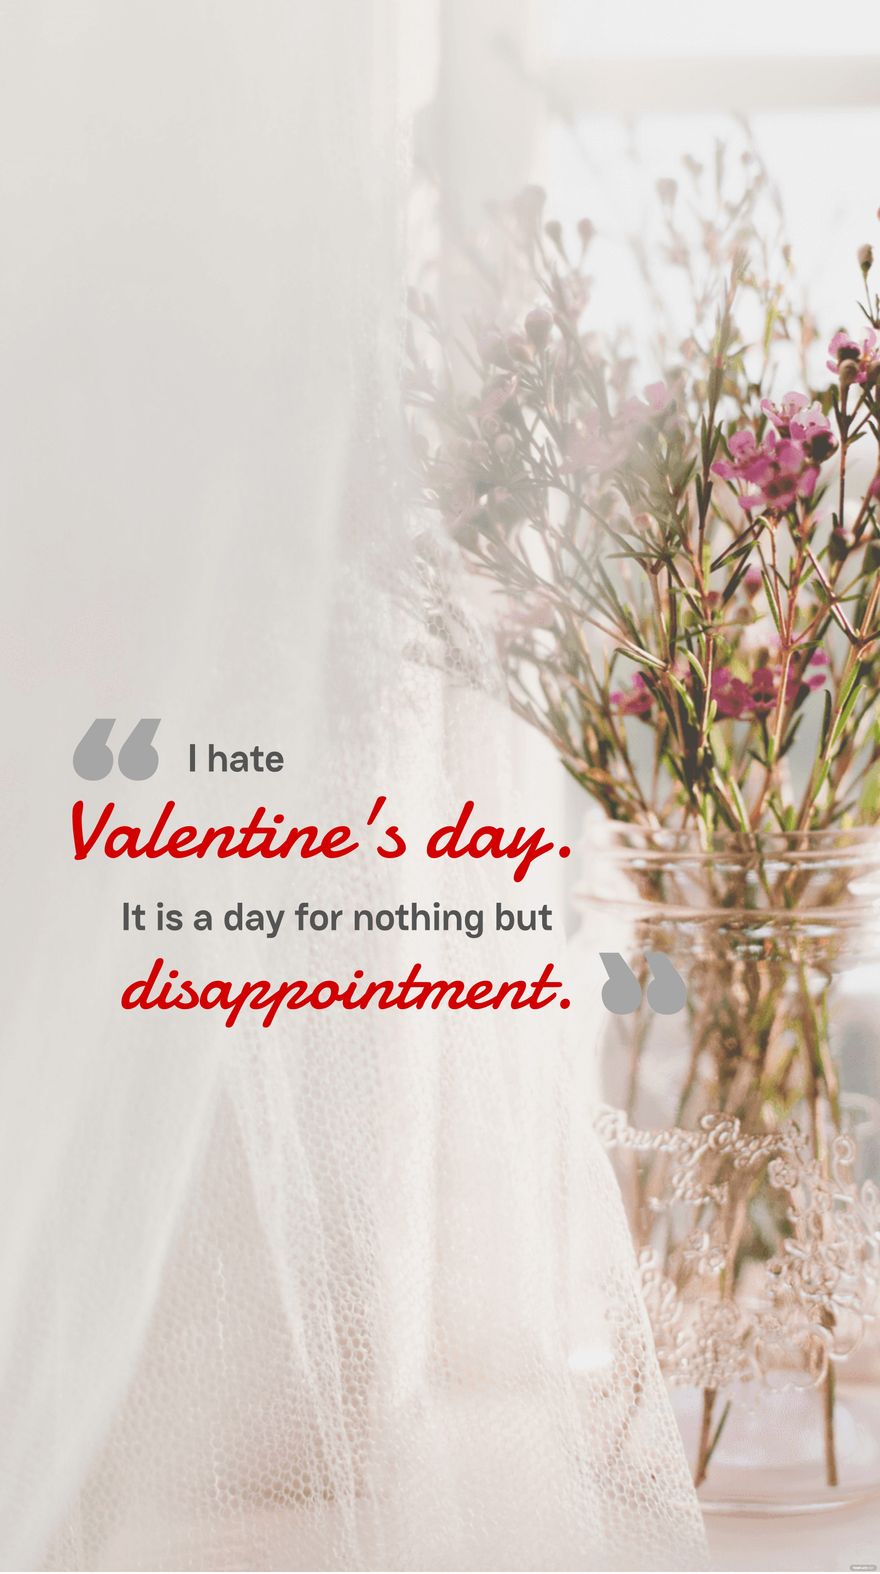 Larisa Oleynik - I hate Valentine's day. It is a day for nothing but disappointment. in JPEG